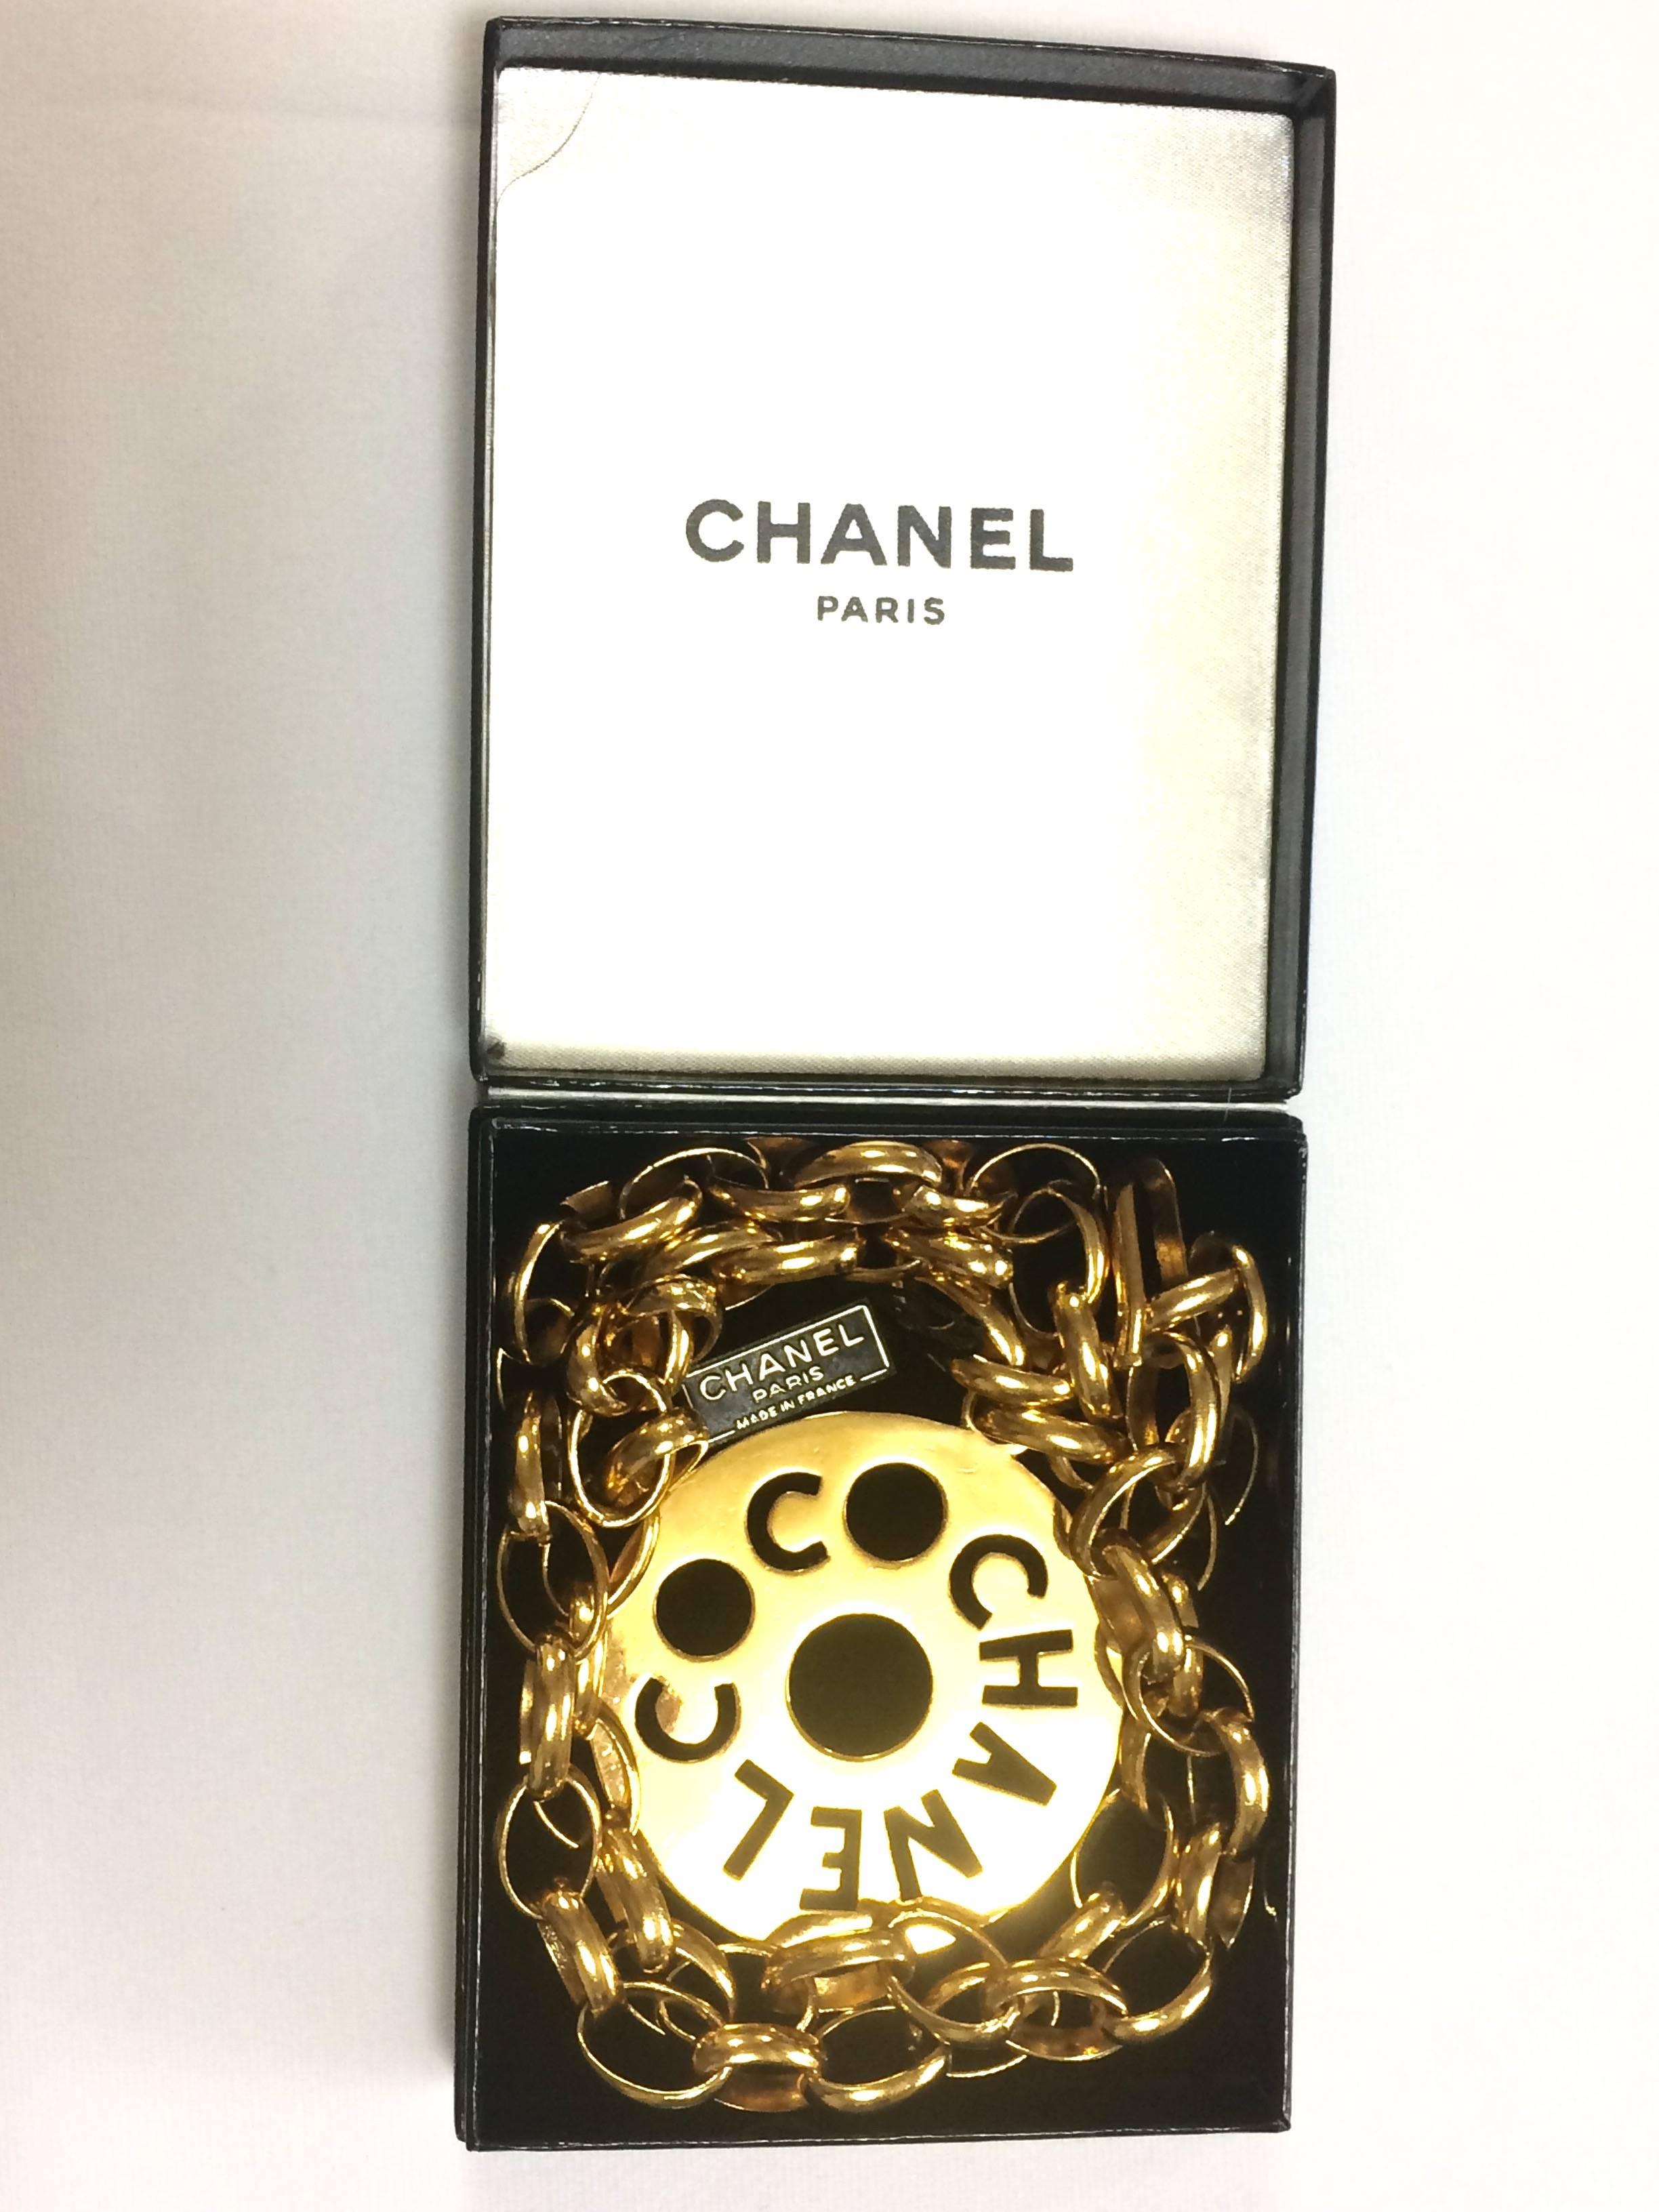 Vintage CHANEL golden chain necklace, chain belt with round logo COCO top. 6